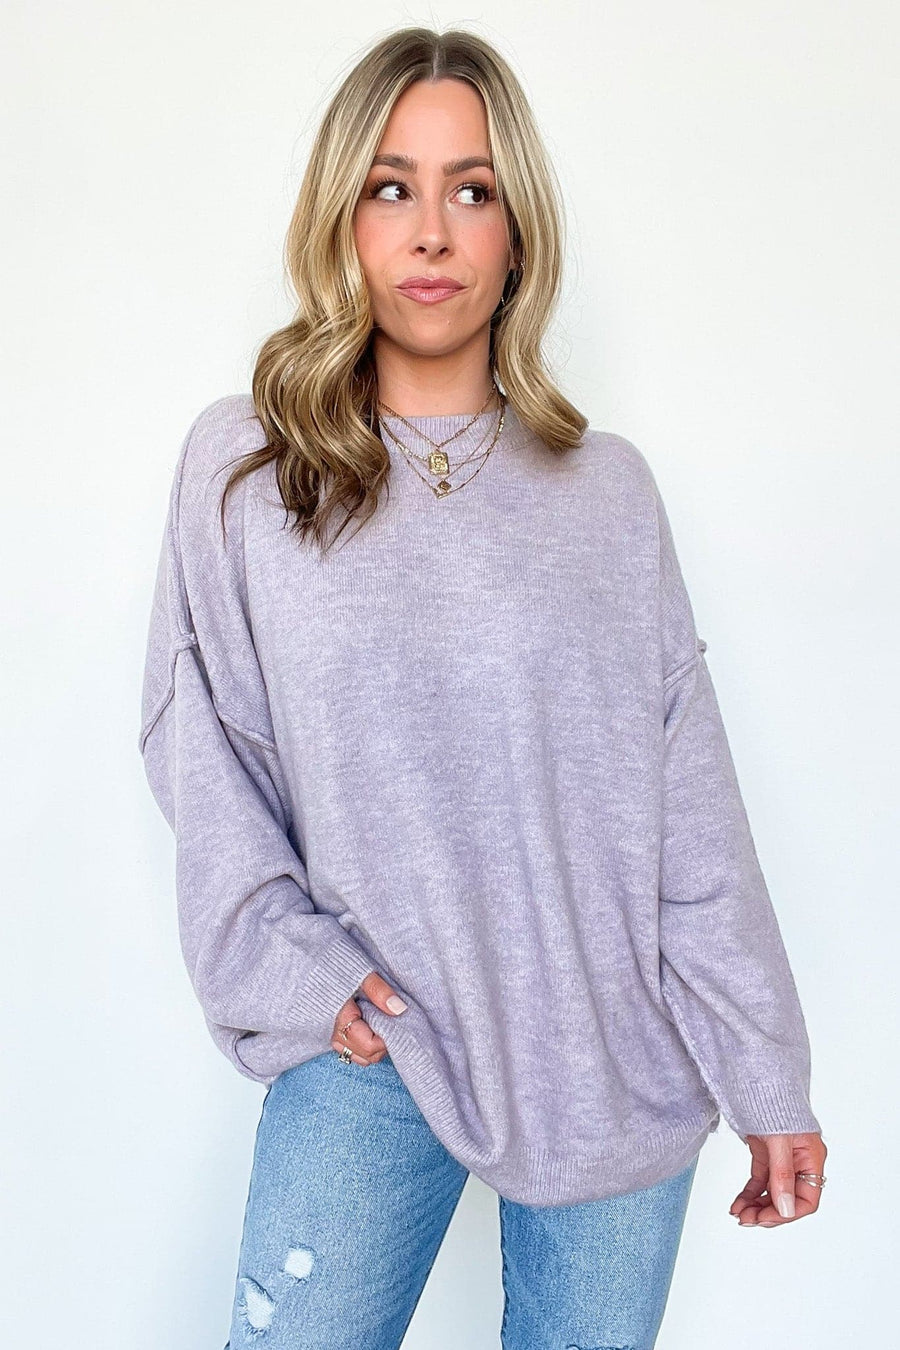 Lilac / S Melrose Avenue Relaxed Fit Sweater - FINAL SALE - kitchencabinetmagic